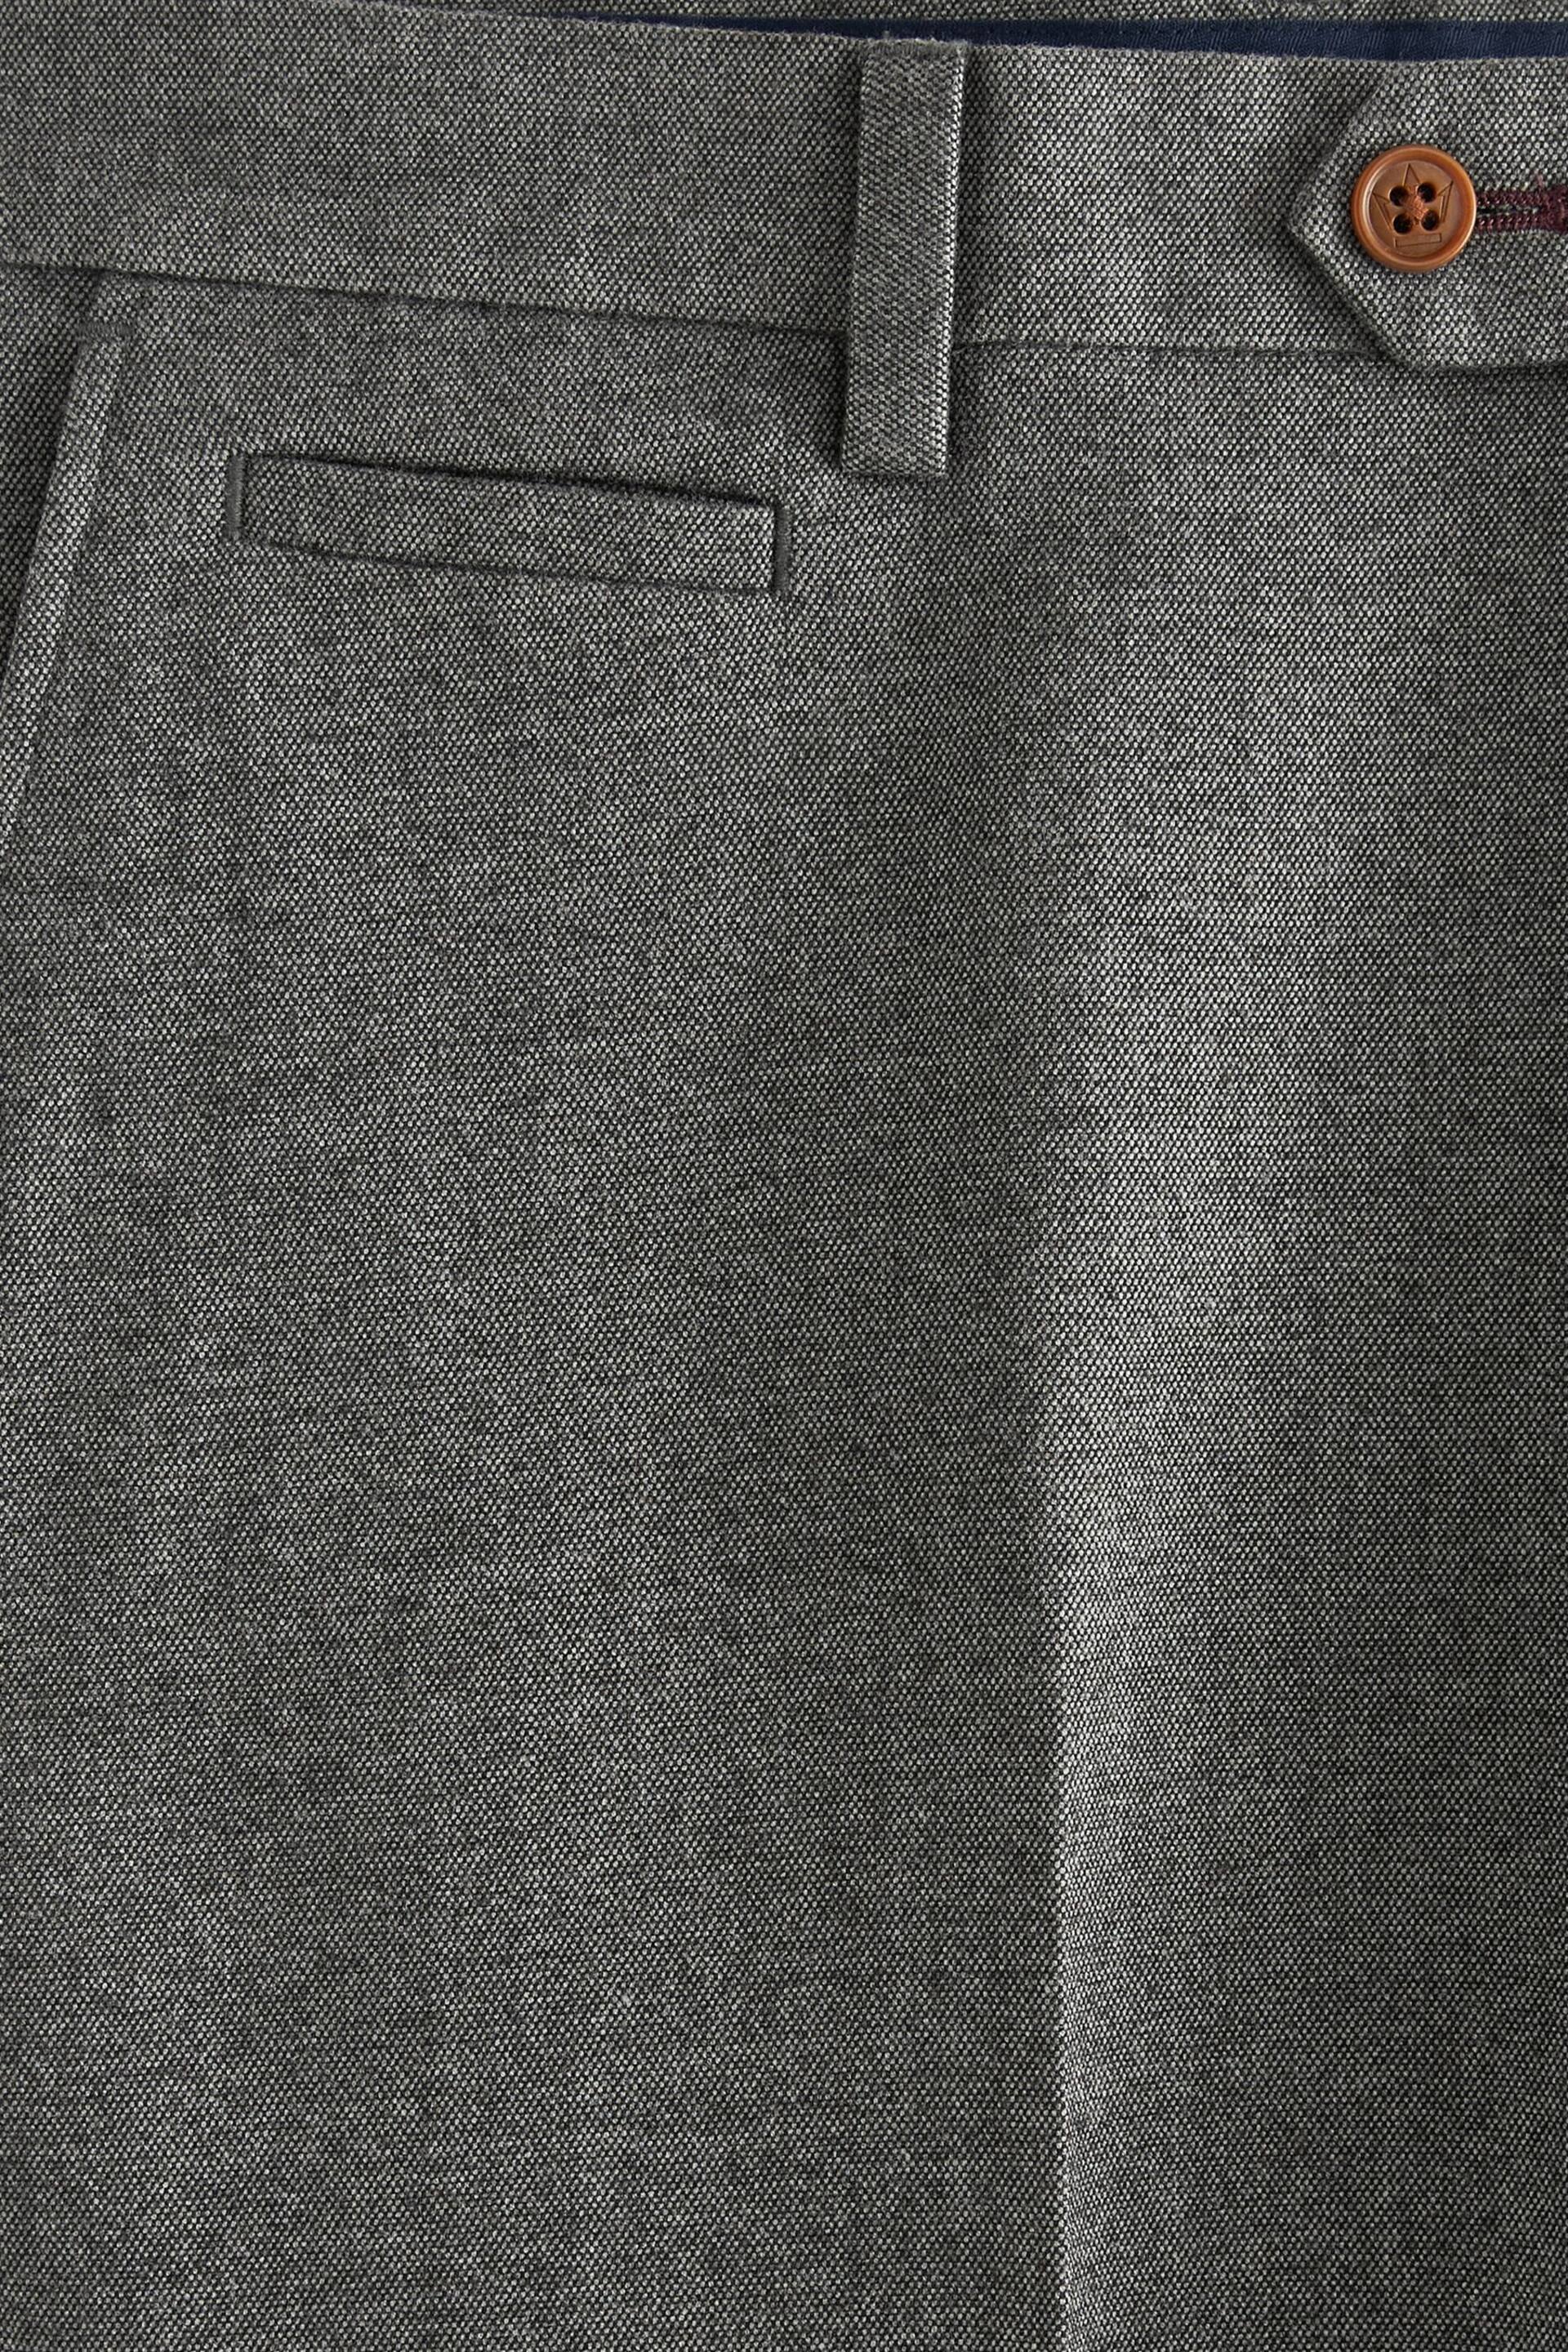 Grey Tailored Trimmed Donegal Fabric Suit: Trousers - Image 7 of 9